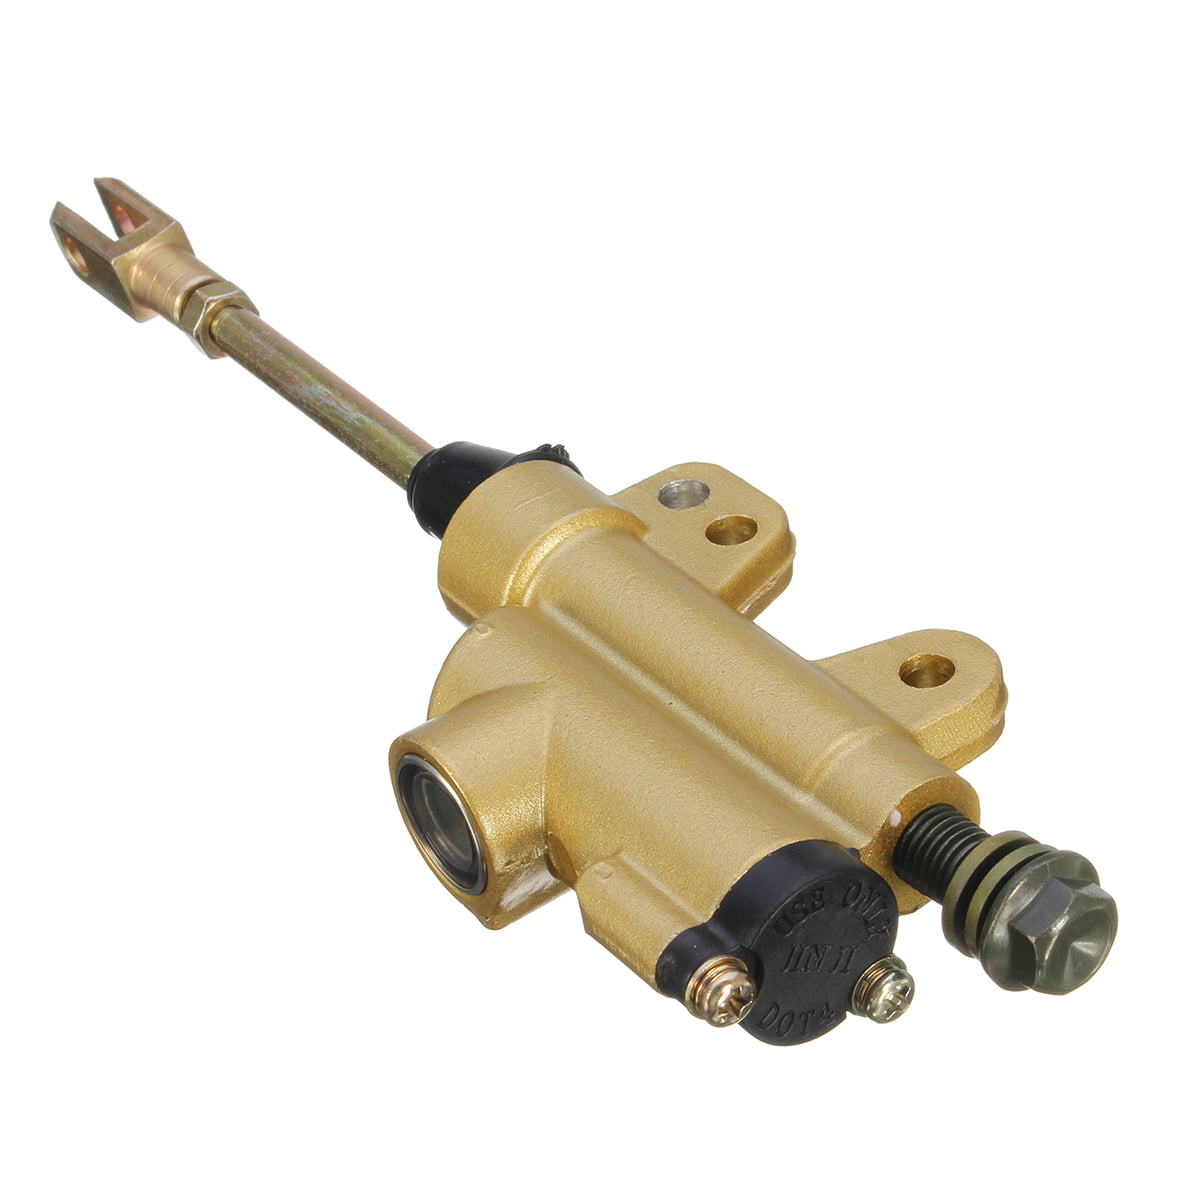 SODIAL Rear Motorcycle Dirt Pit Bike ATV Hydraulic Foot Master Brake Cylinder Gold R Maitre-cylindre 